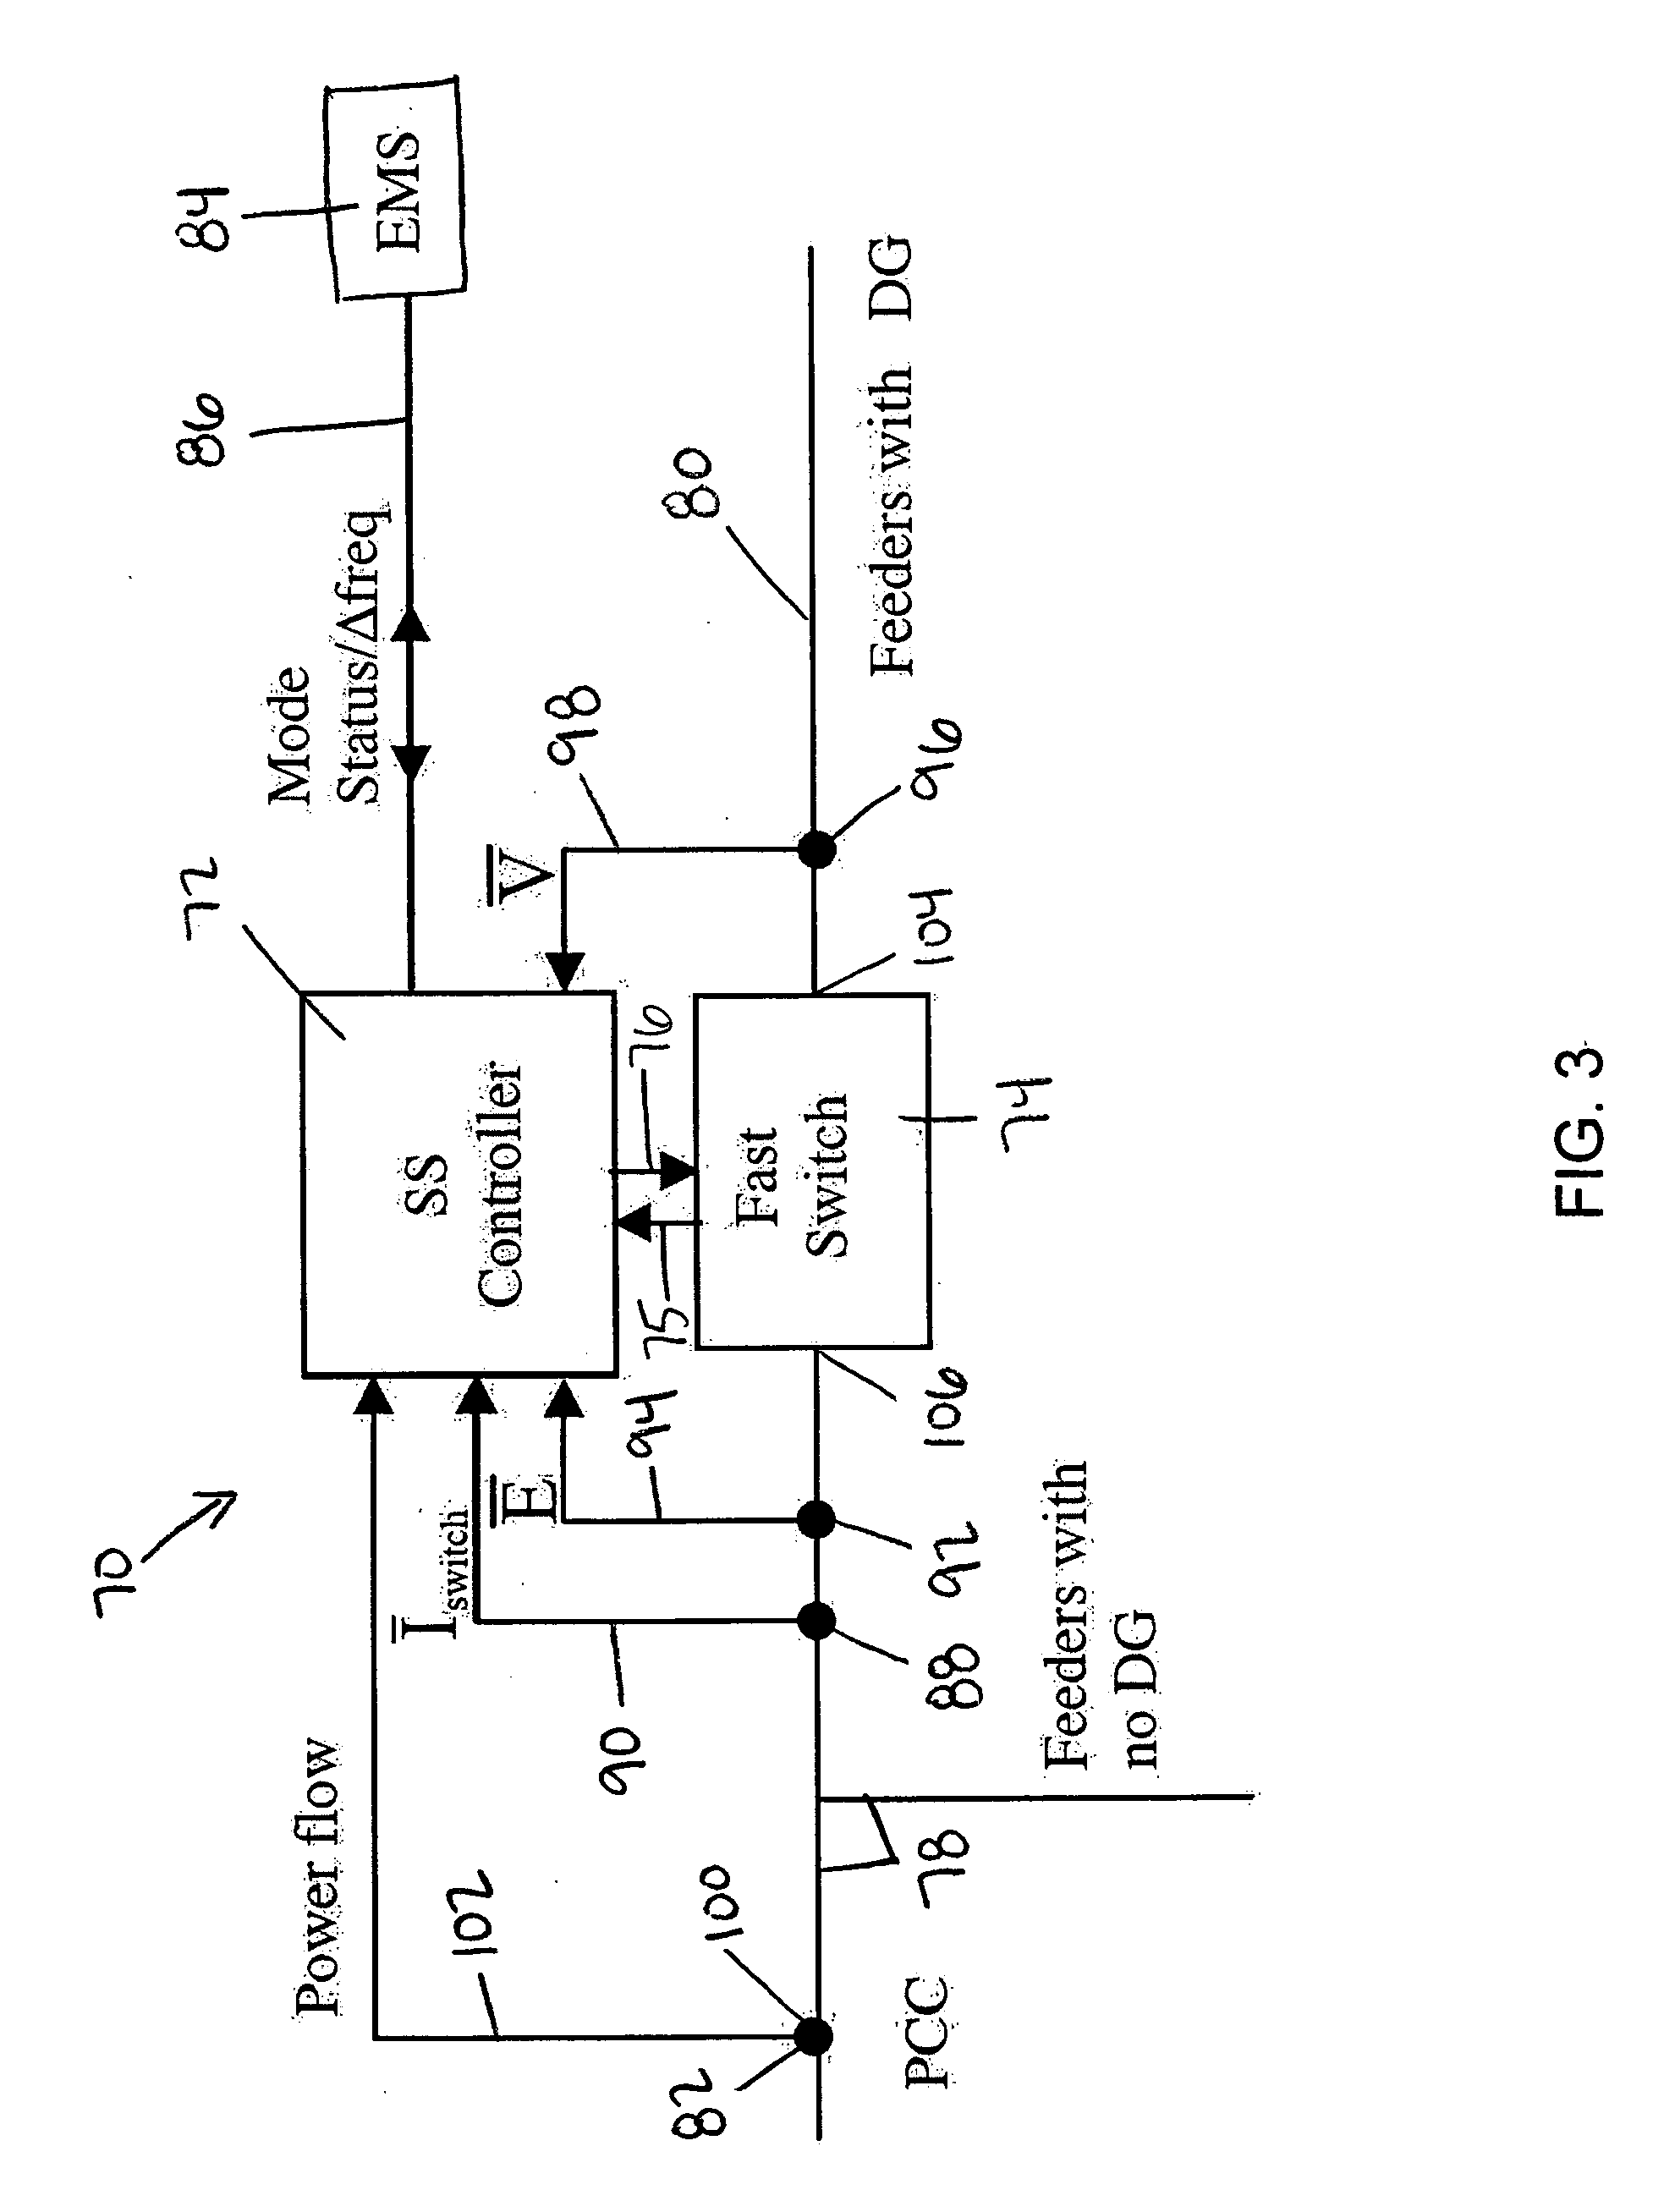 Interface switch for distributed energy resources